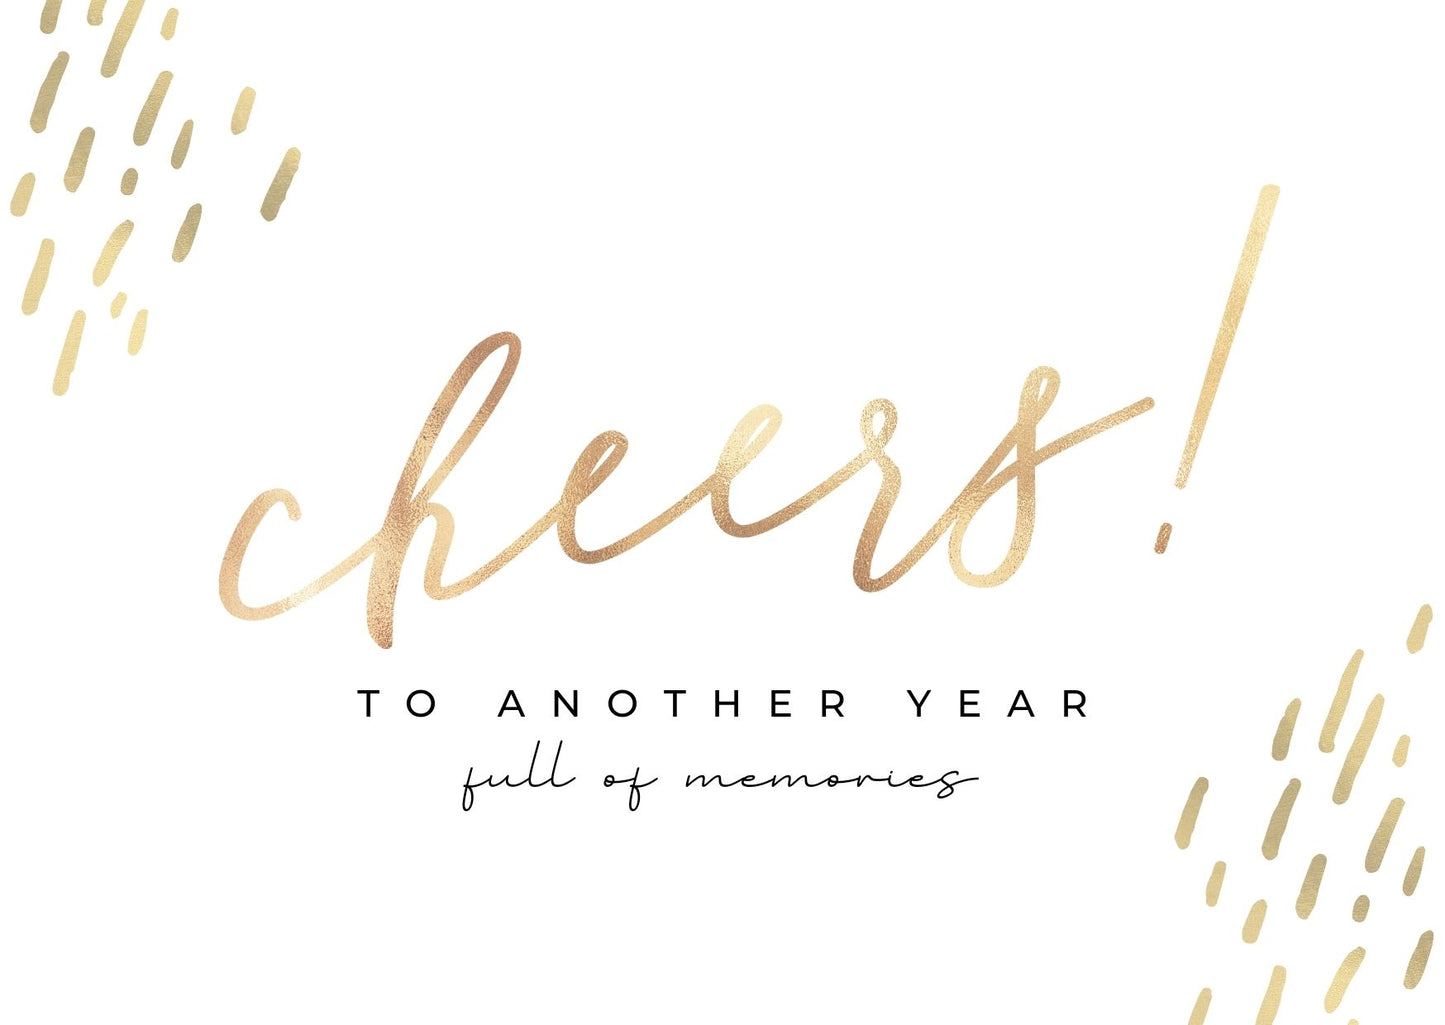 'Cheers to another year' card